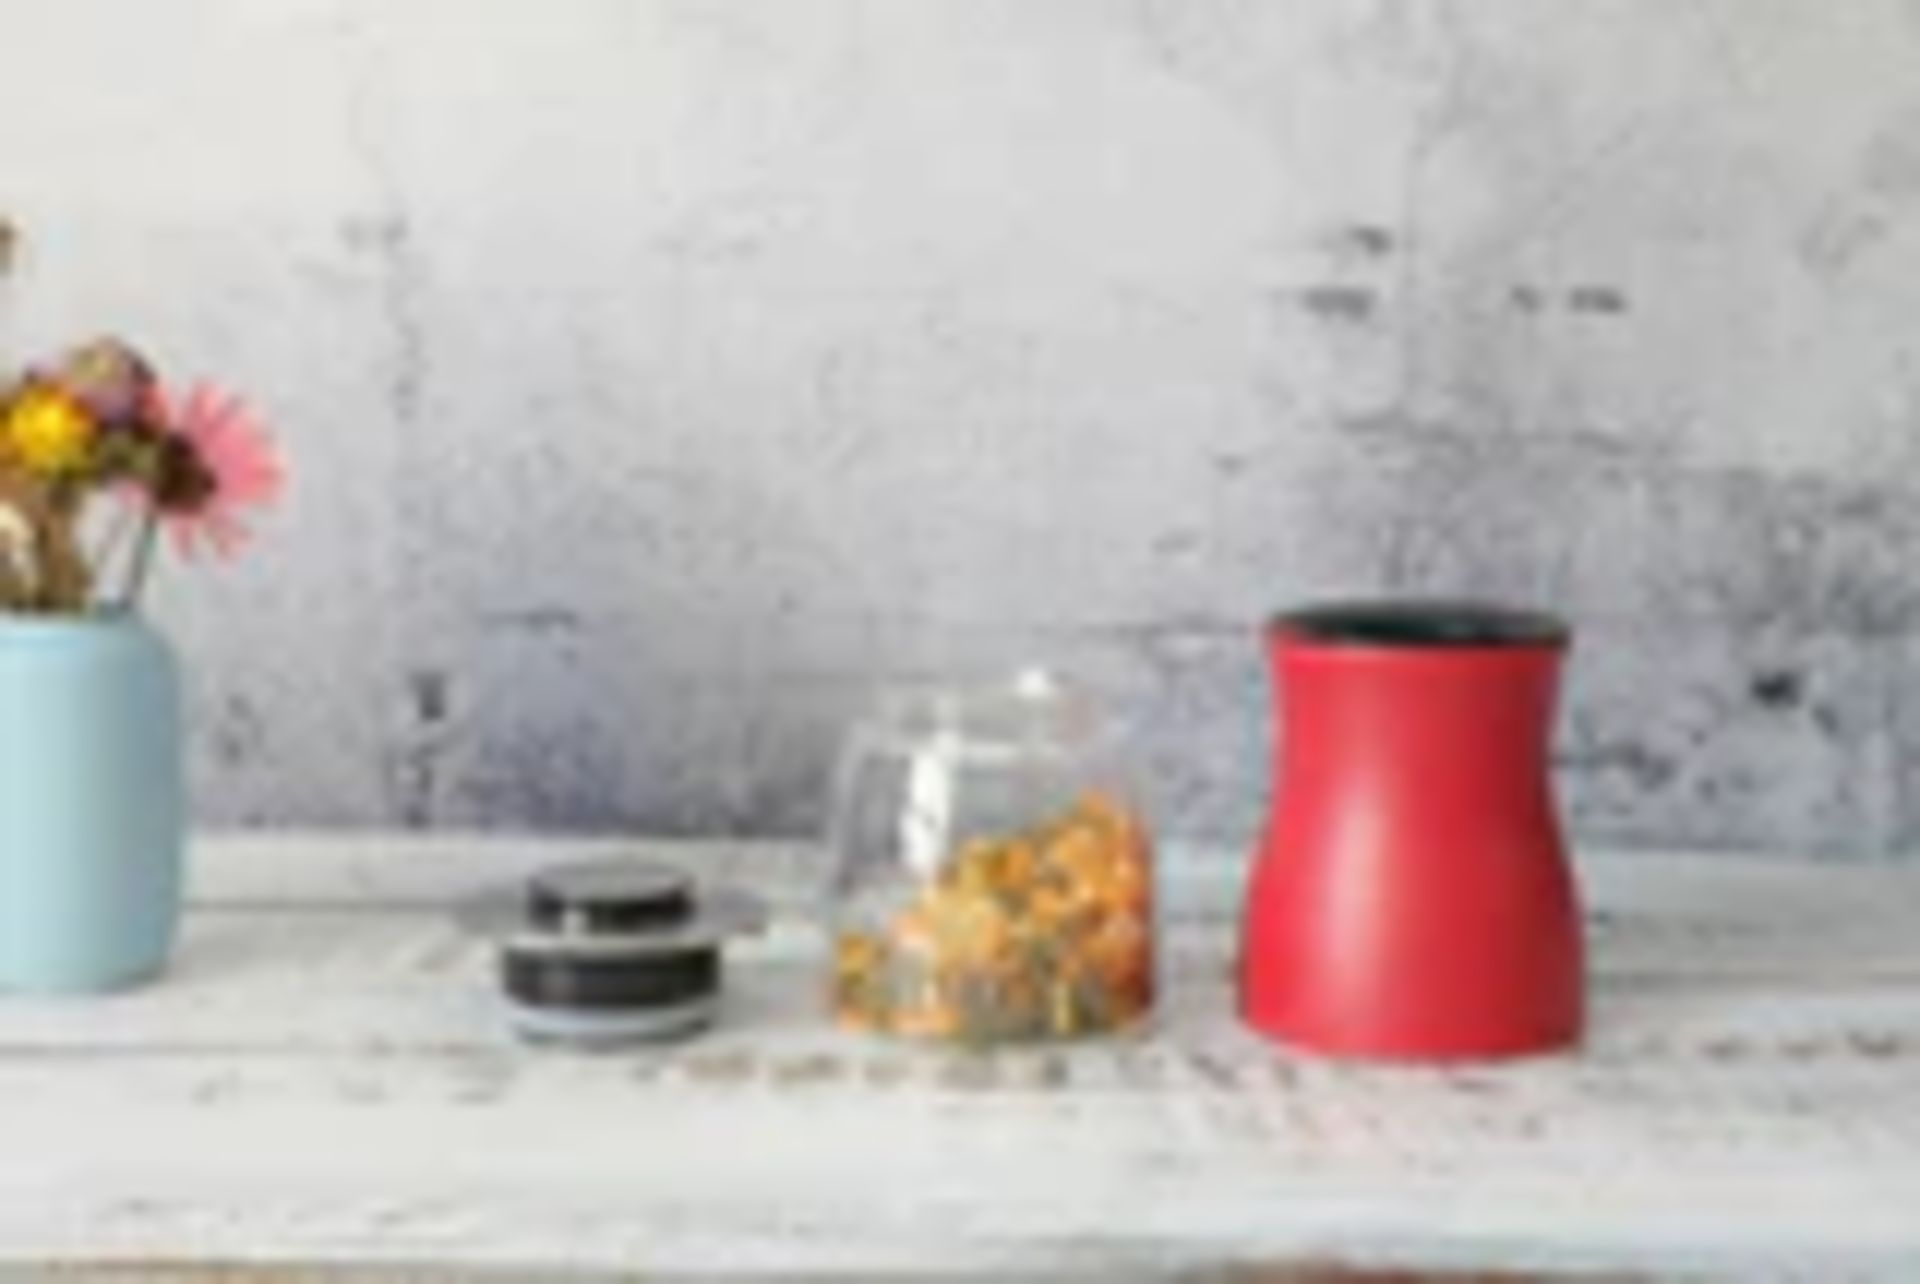 Brand New 3 Pc Kitchen Canisters Red